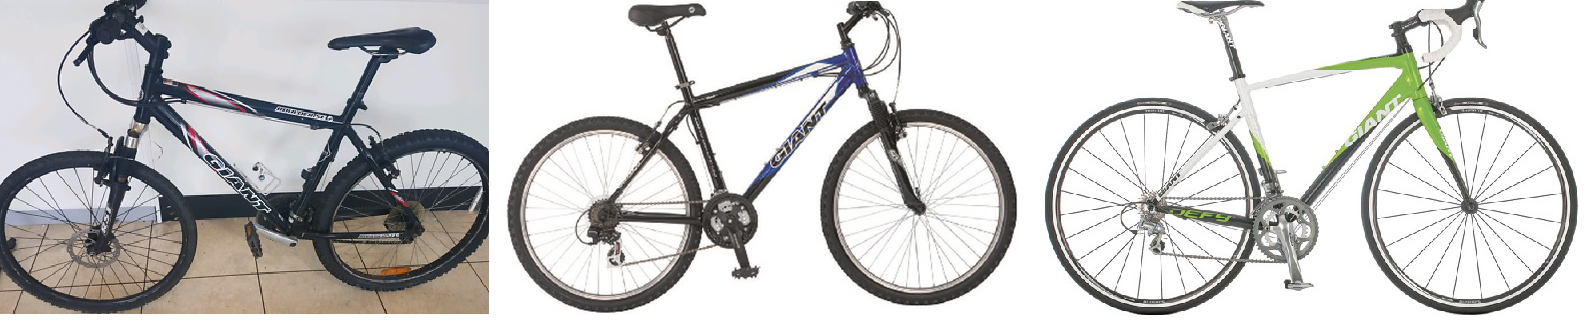 Giant bikes similar to those stolen from Devonport overnight 18-19 March